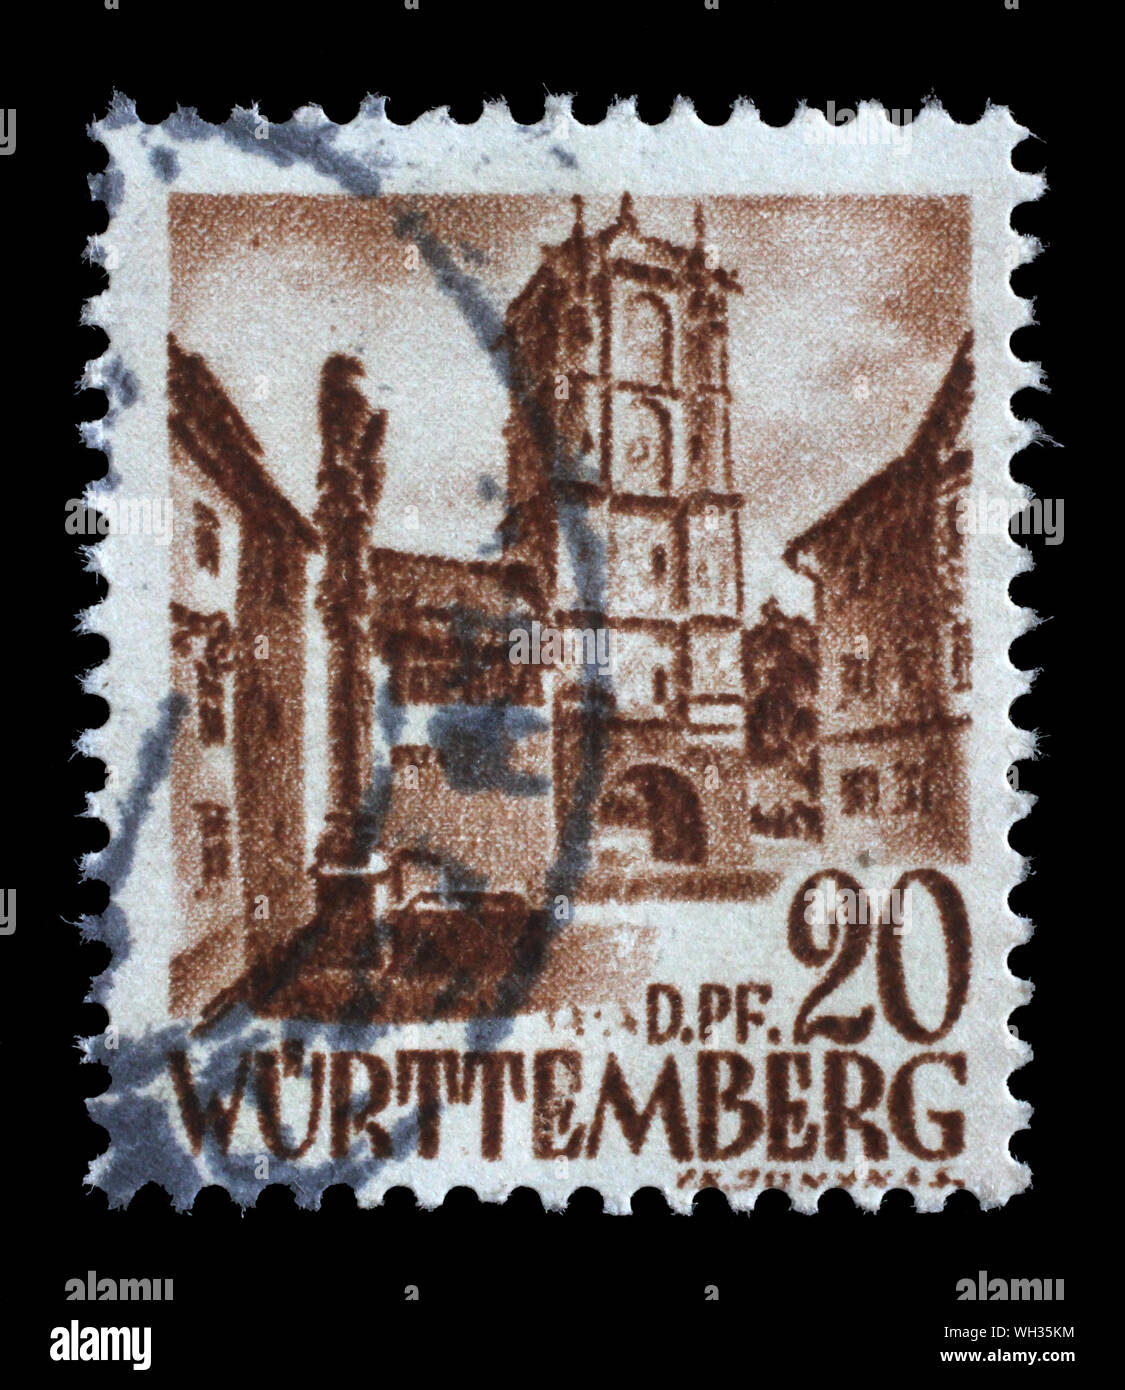 Stamp issued in Germany - Wurttemberg, Allied Occupation 1945-1949 shows City Gate from Wangen, circa 1948. Stock Photo